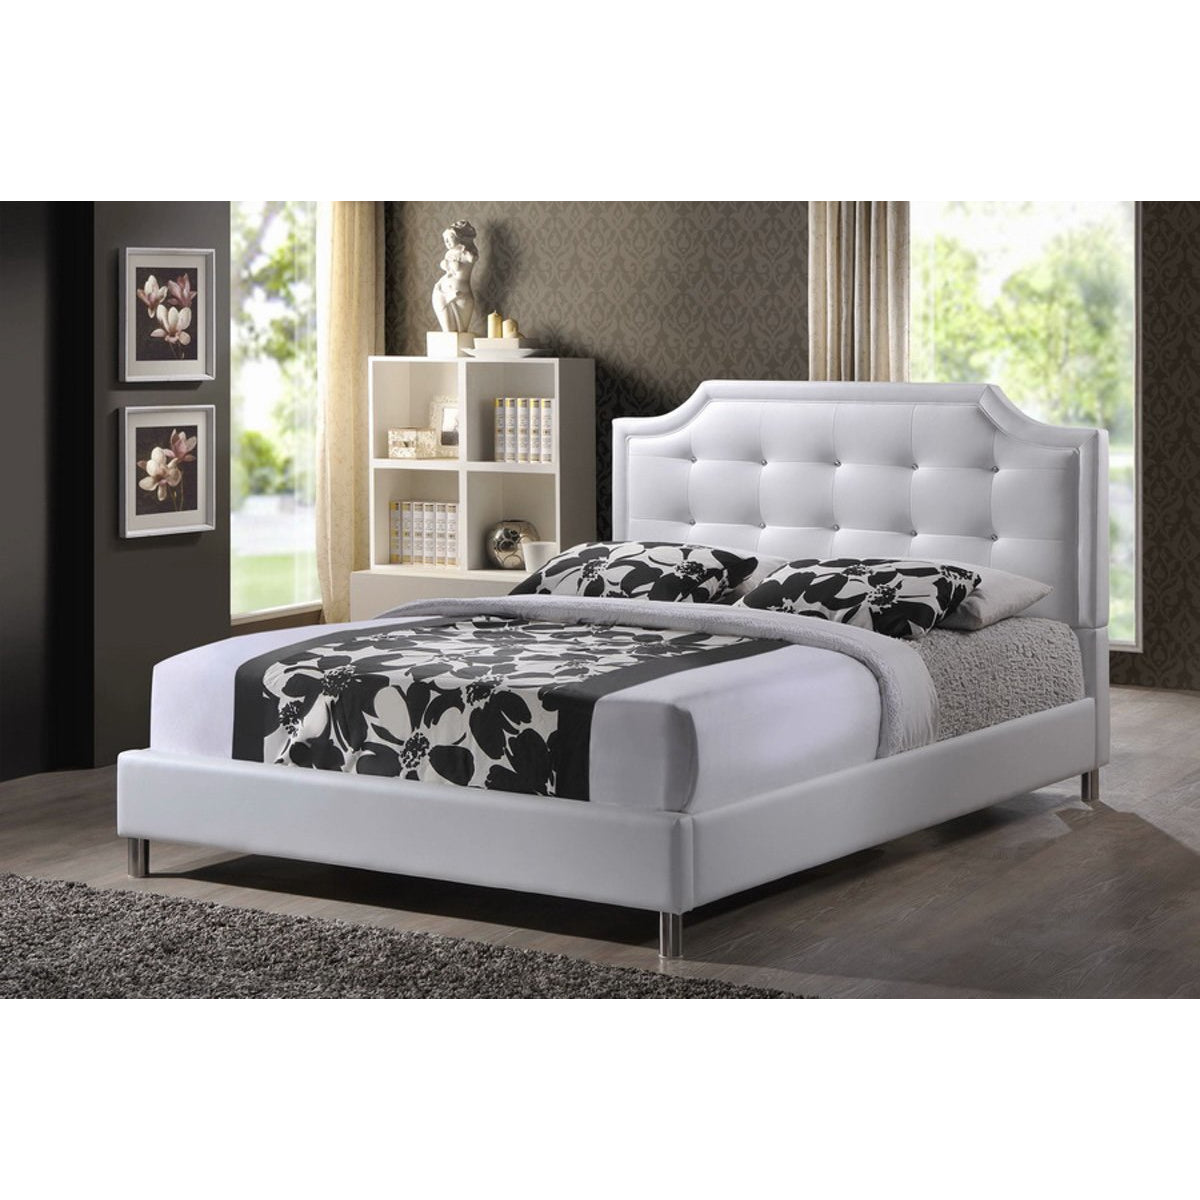 Baxton Studio Carlotta White Modern Bed with Upholstered Headboard - Full Size Baxton Studio-beds-Minimal And Modern - 1